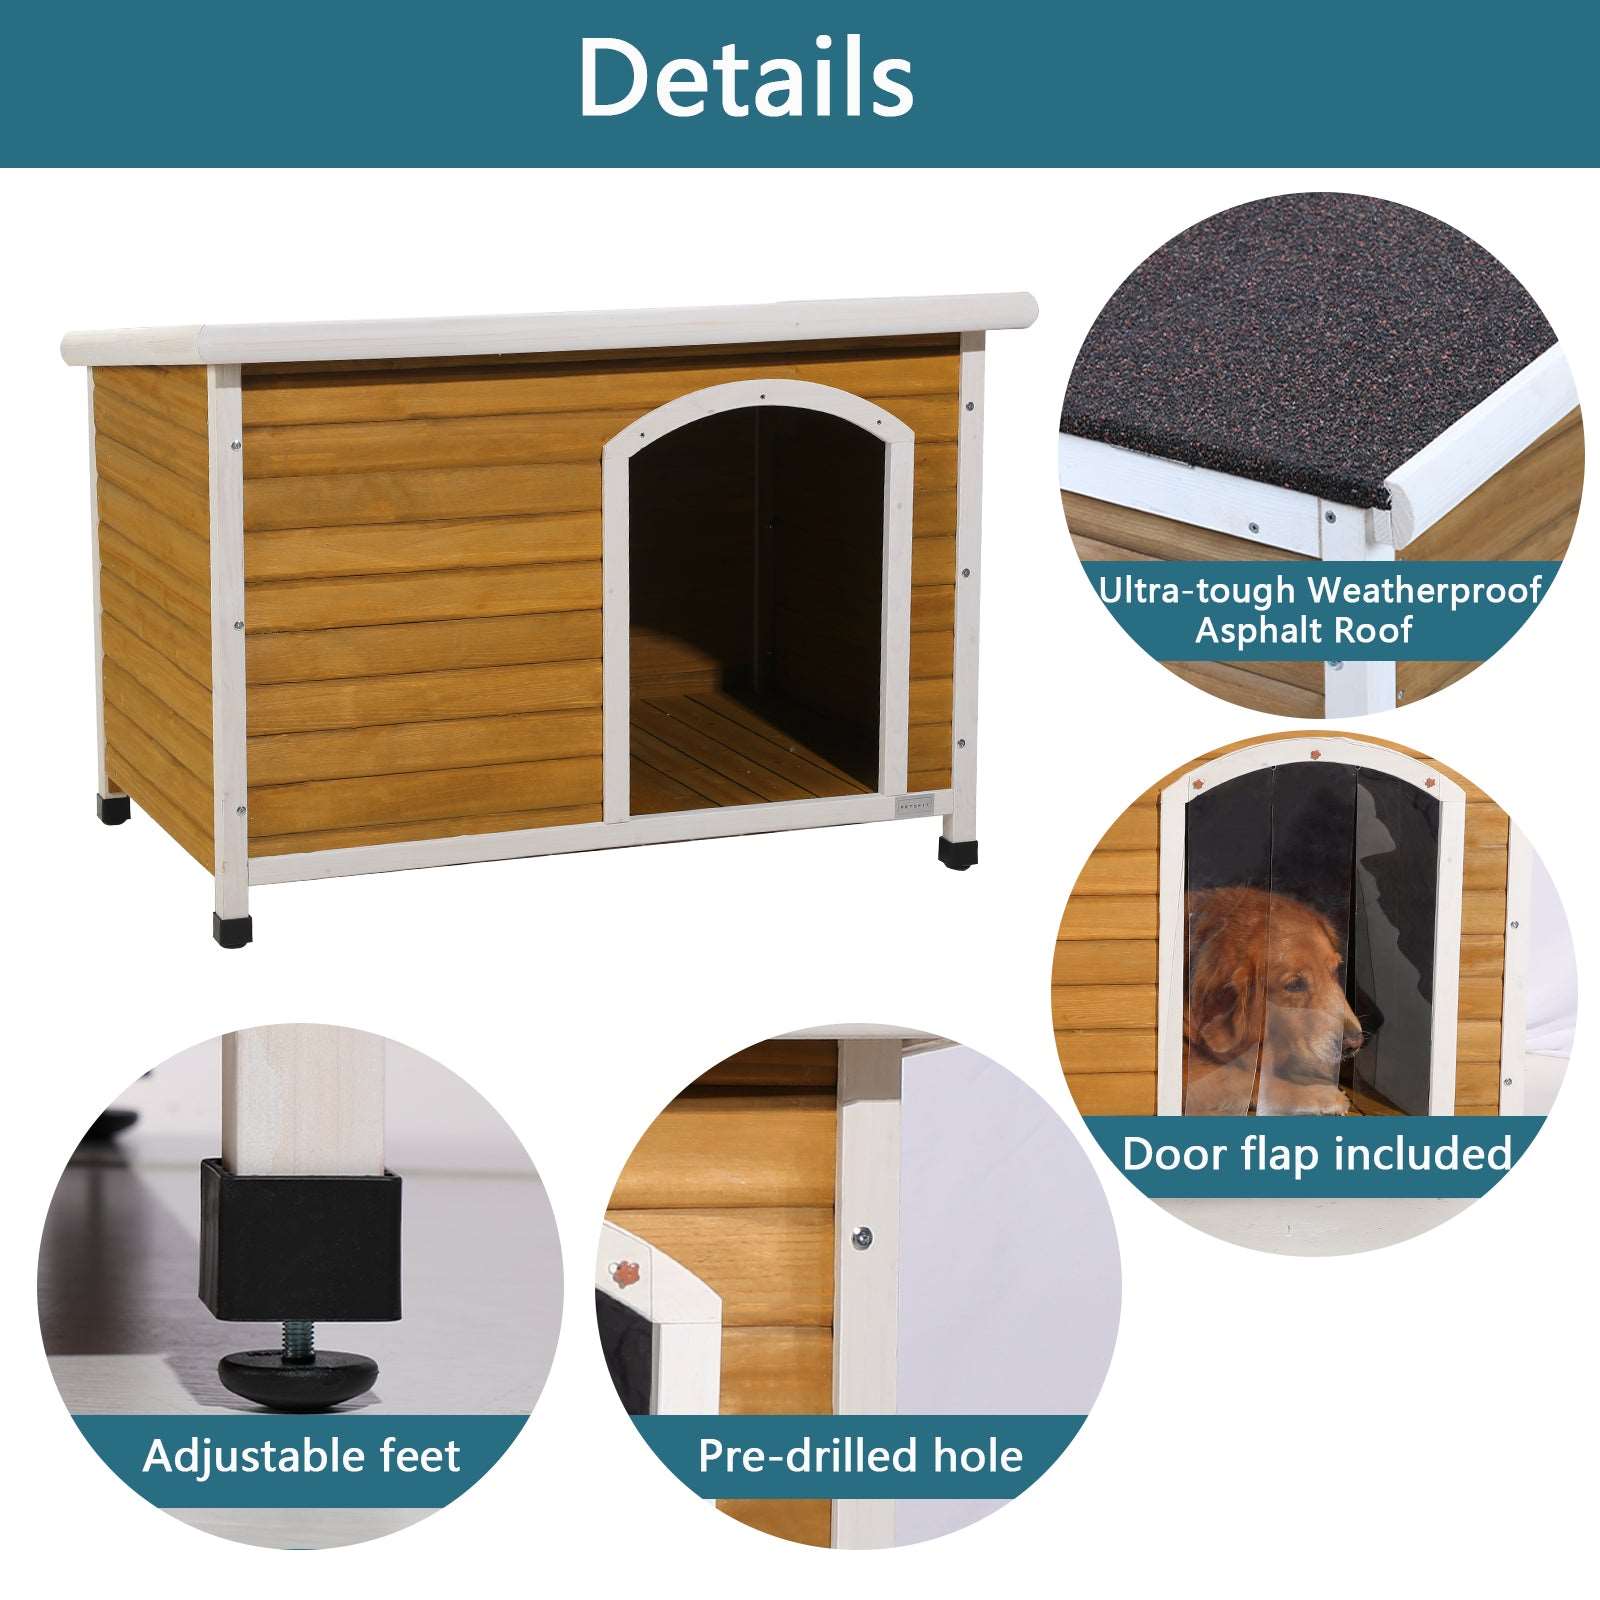 Petsfit-Wooden-Dog-House-for-Medium-to-Large-Dogs-05